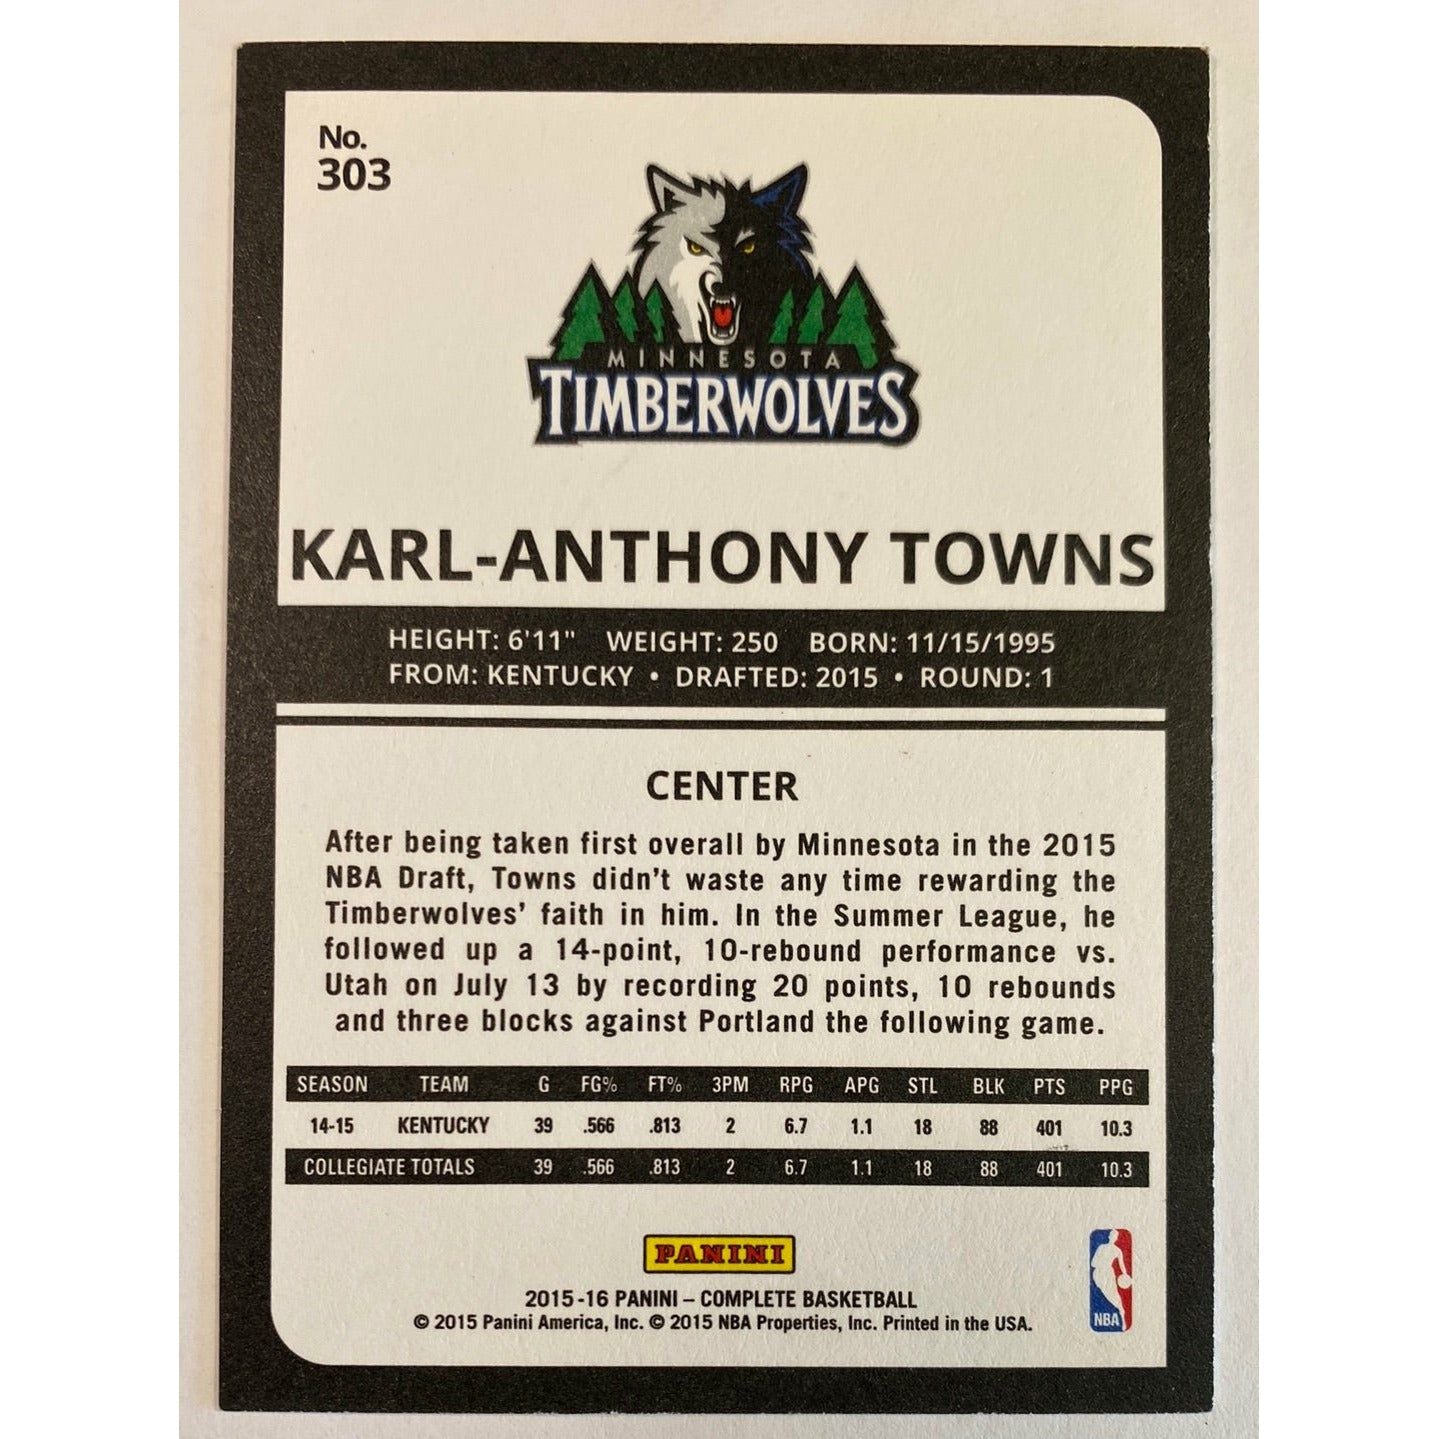 2015-16 Panini Complete Karl-Anthony Towns RC